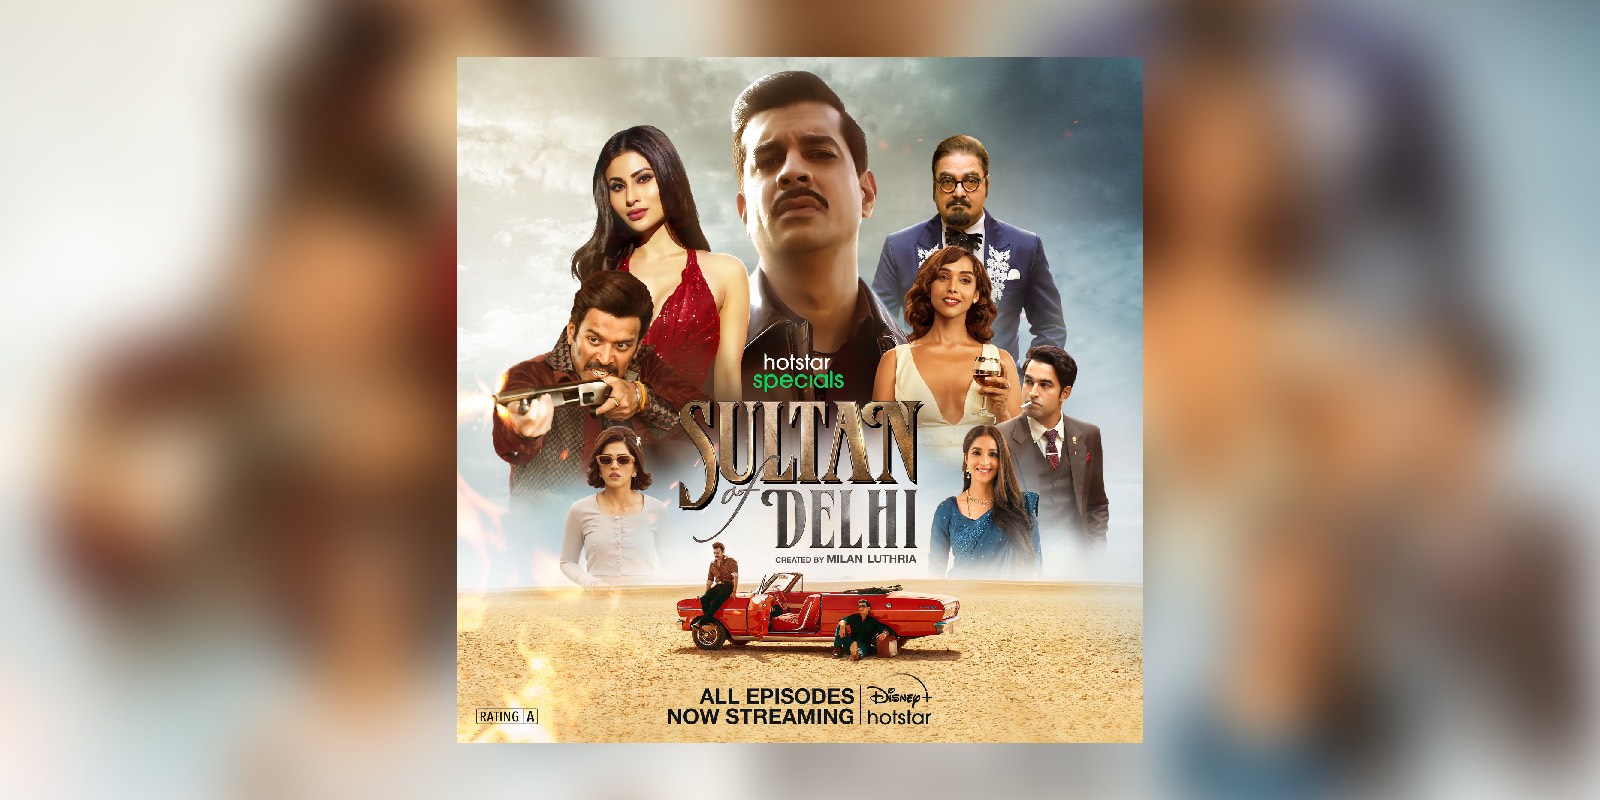 A poster of the web series Sultan of Delhi